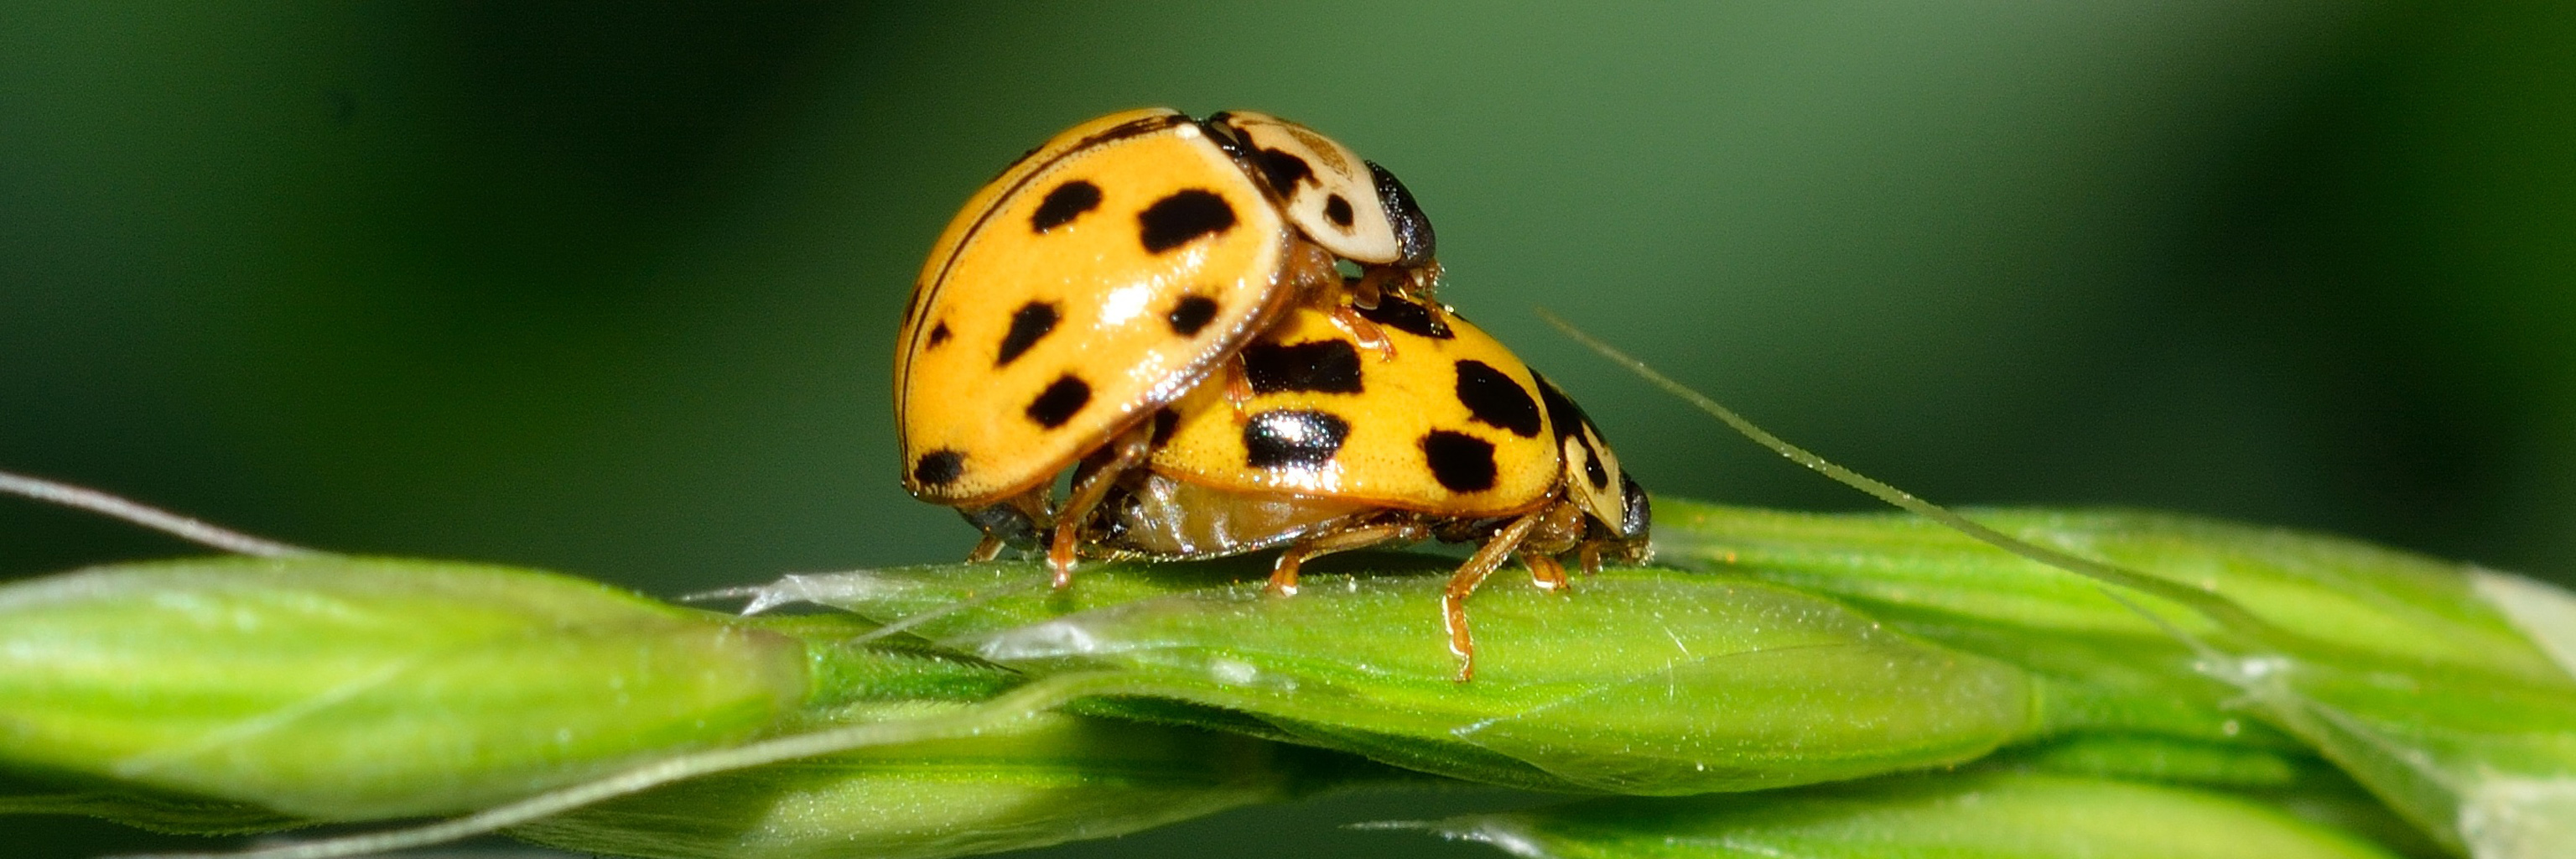 Two lady bugs mating